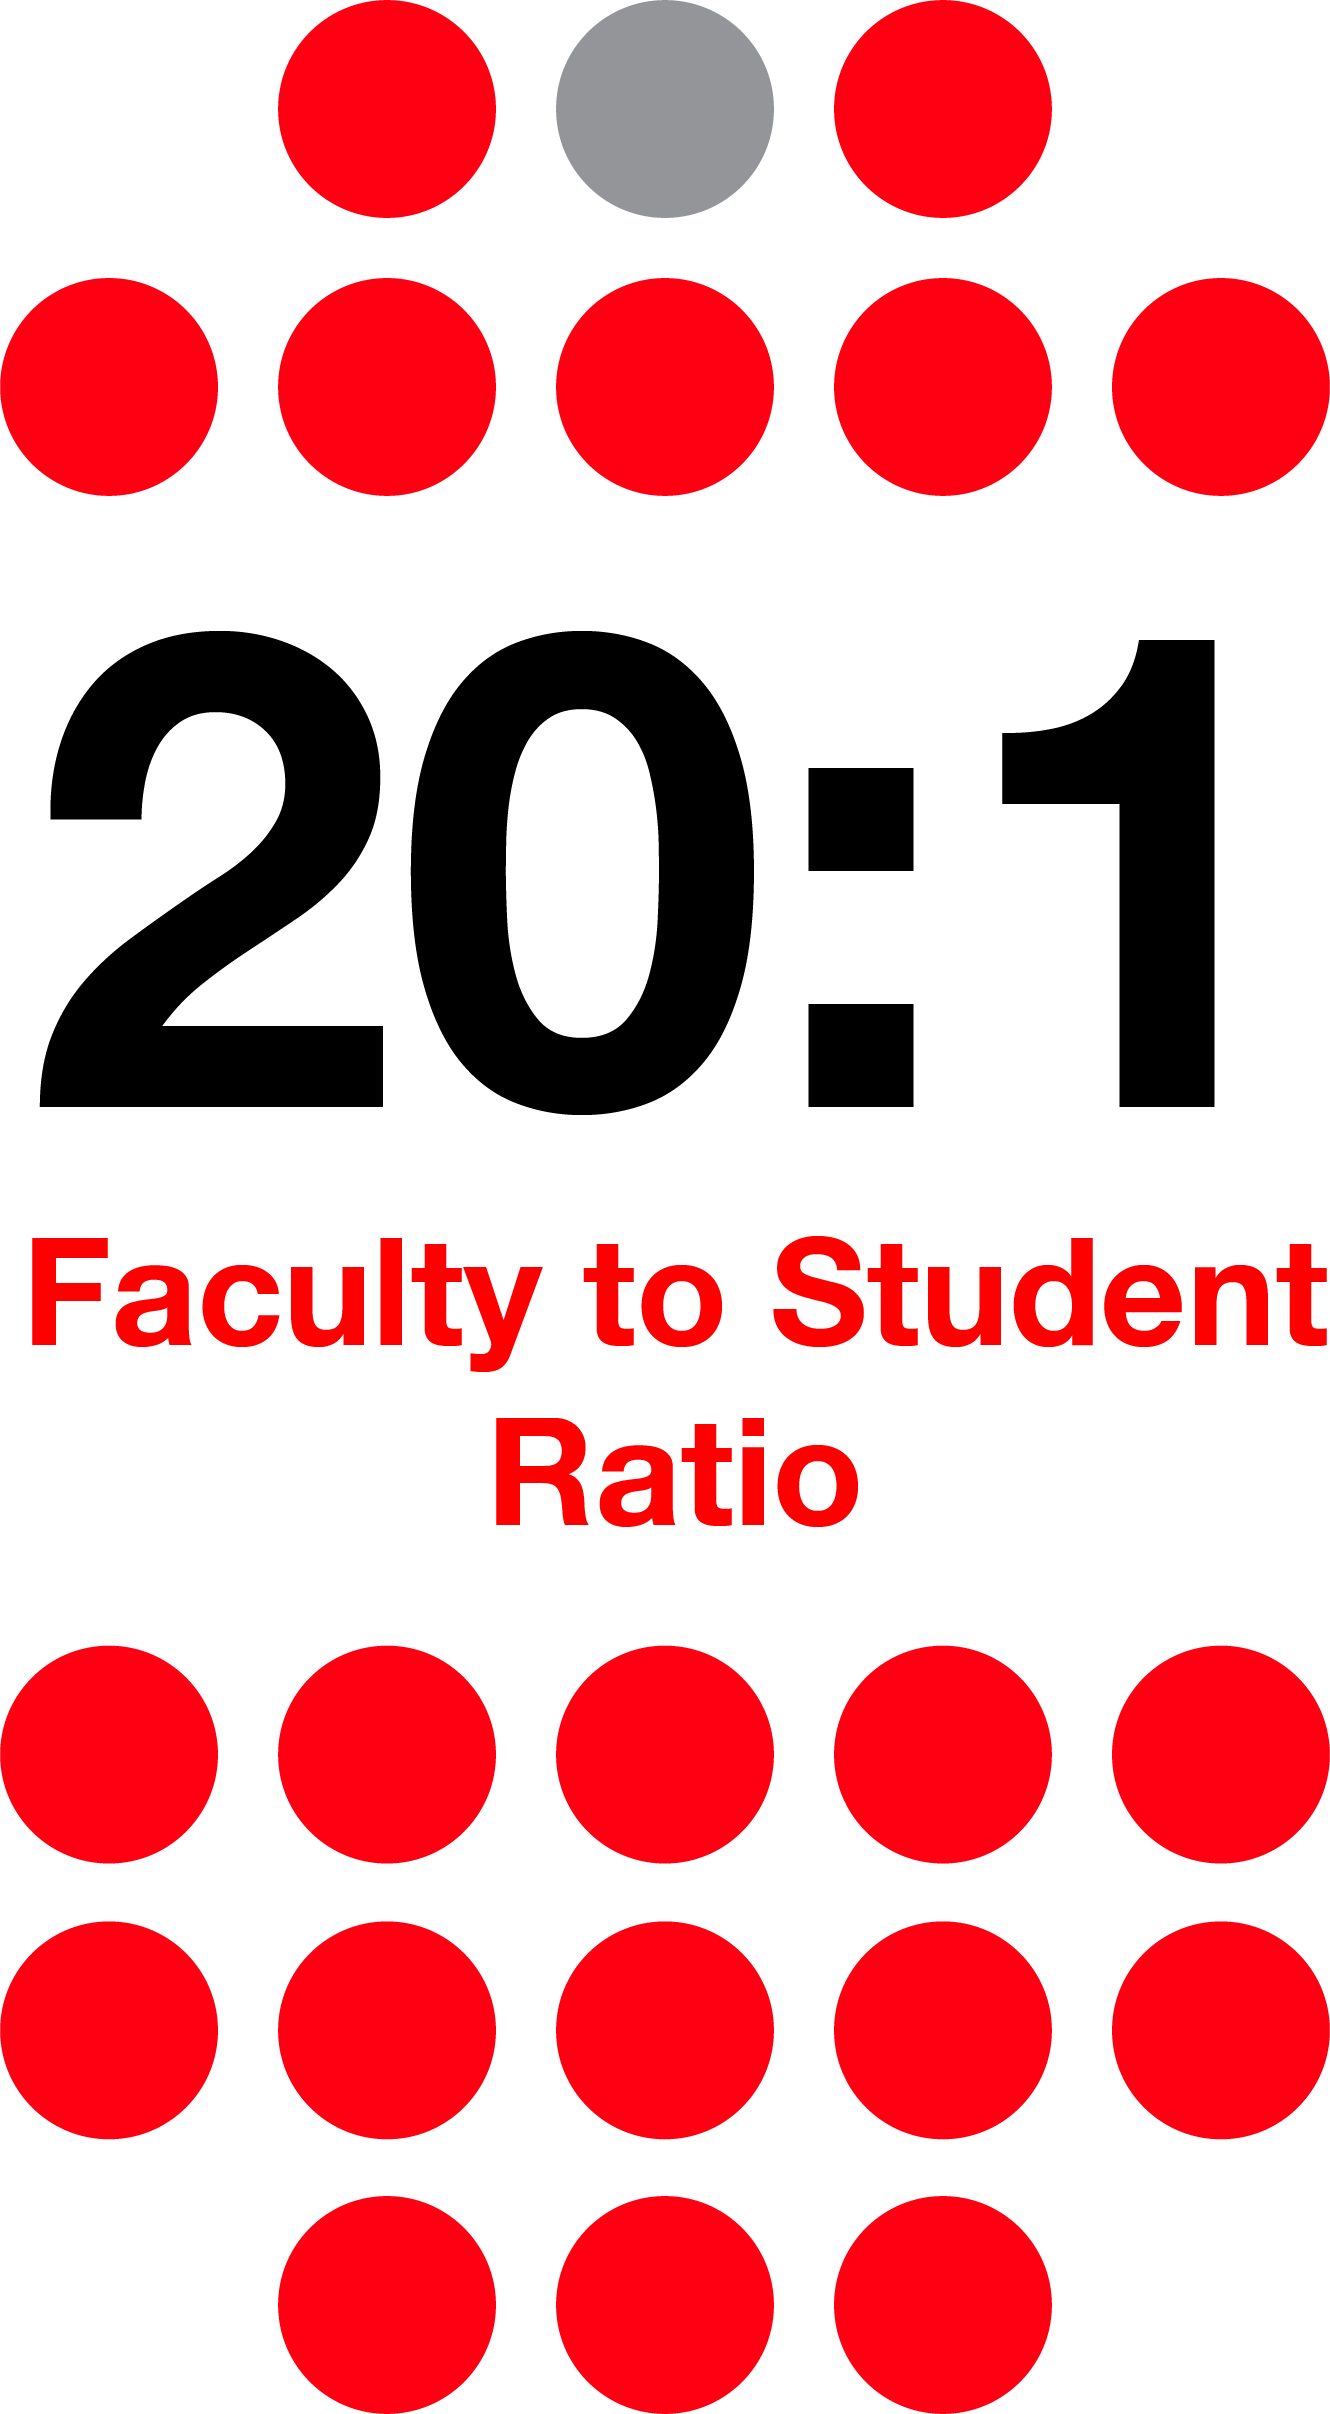 22 to 1 Faculty to Student Ratio